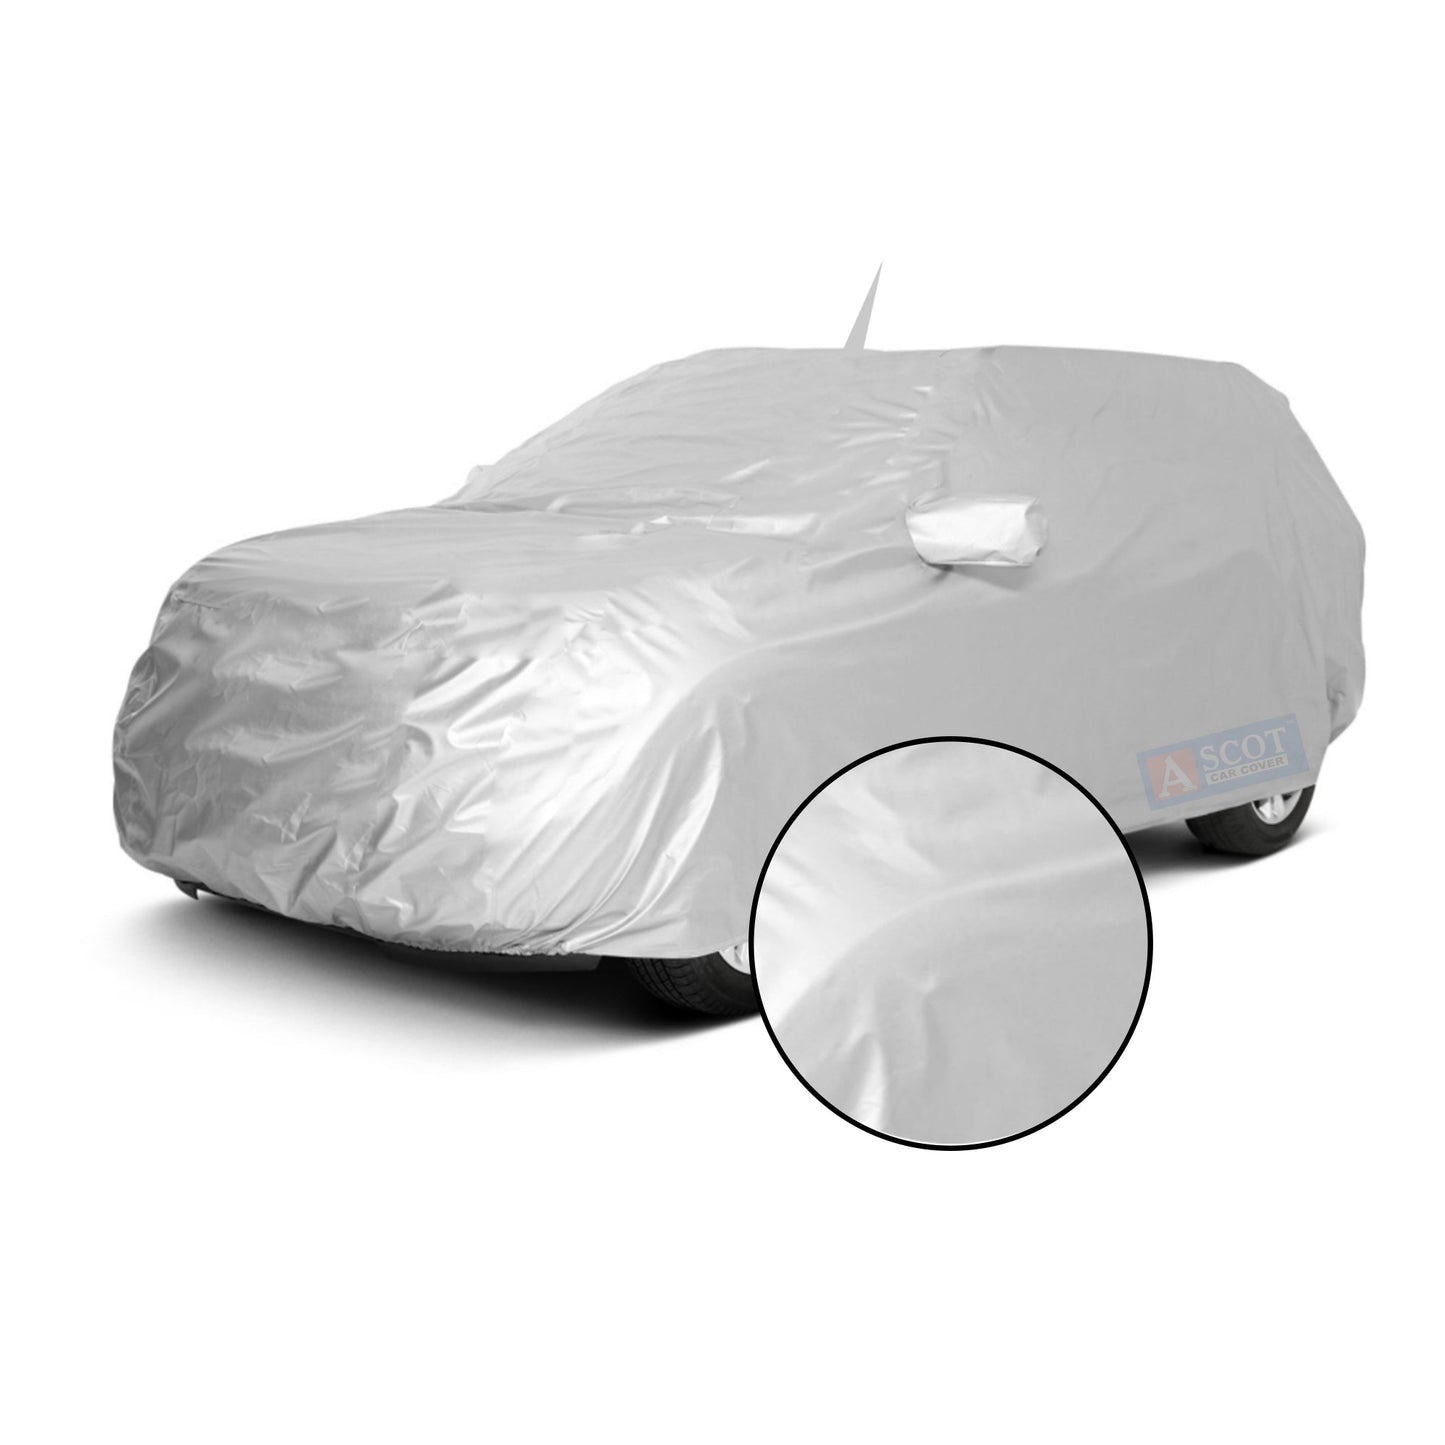 Ascot Mercedes-Benz G-Class 2018-2024 Model Car Body Cover Dust Proof, Trippel Stitched